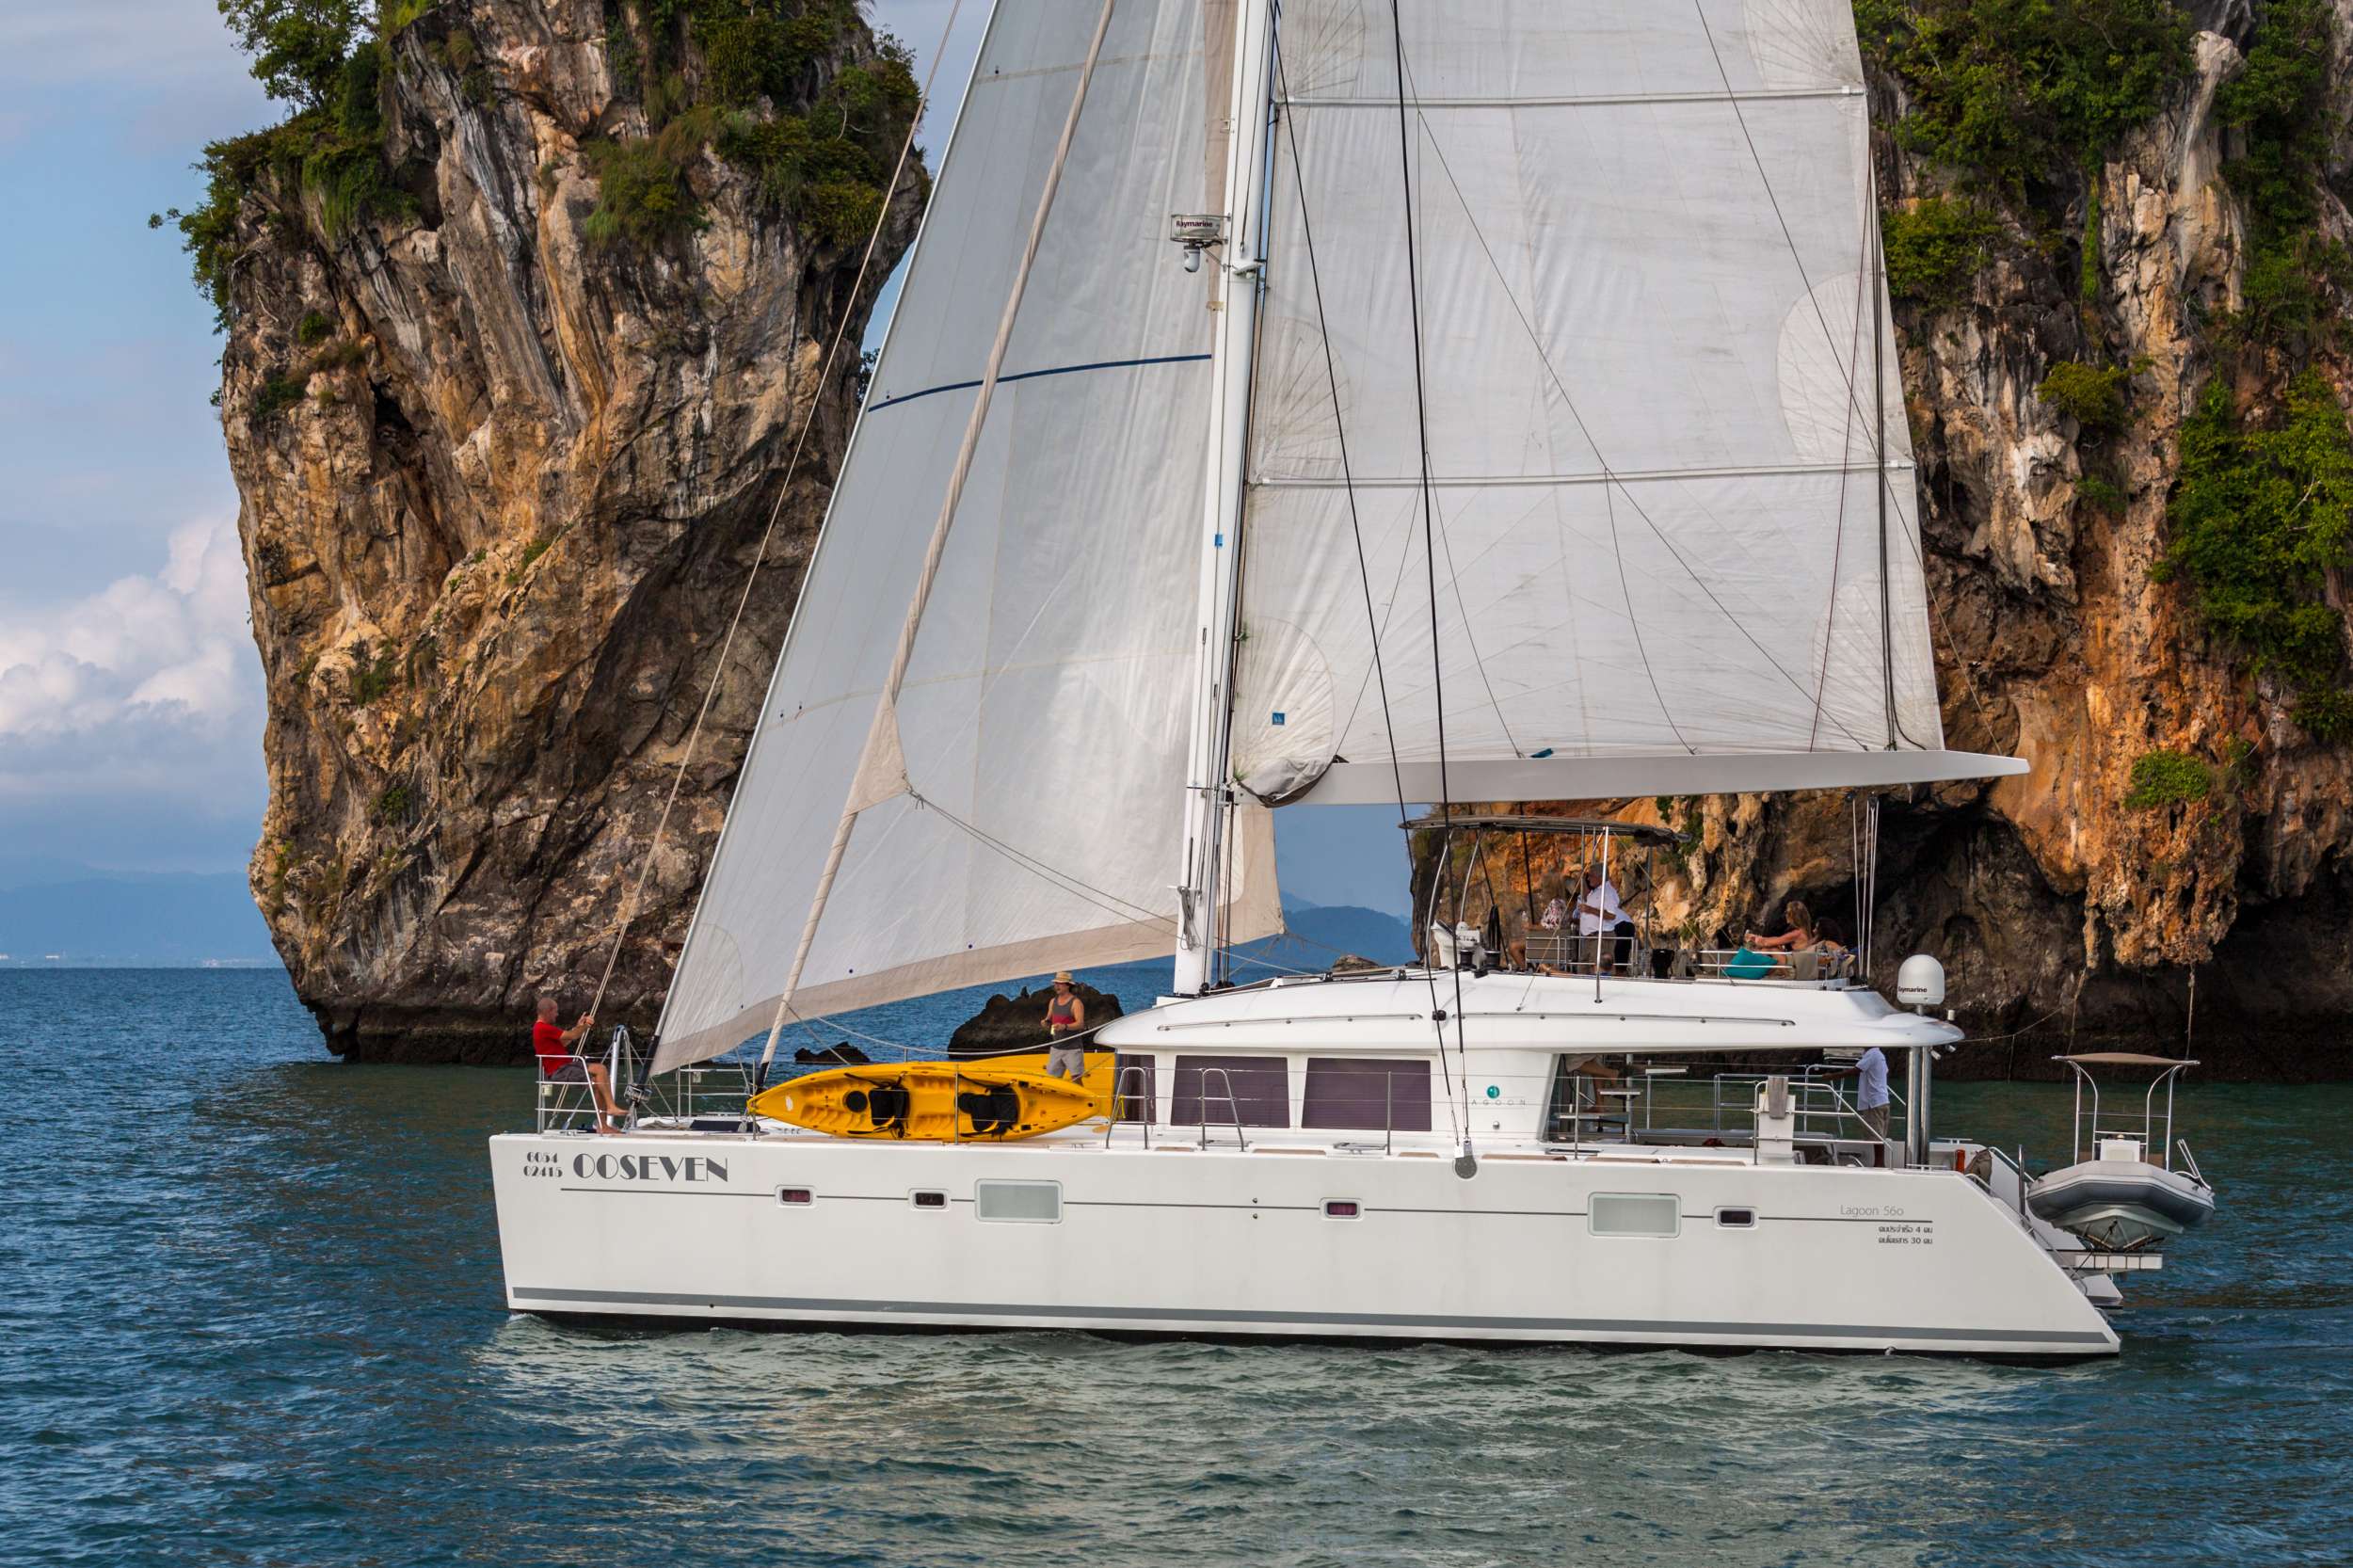 00SEVEN - Yacht Charter Langkawi & Boat hire in SE Asia 4